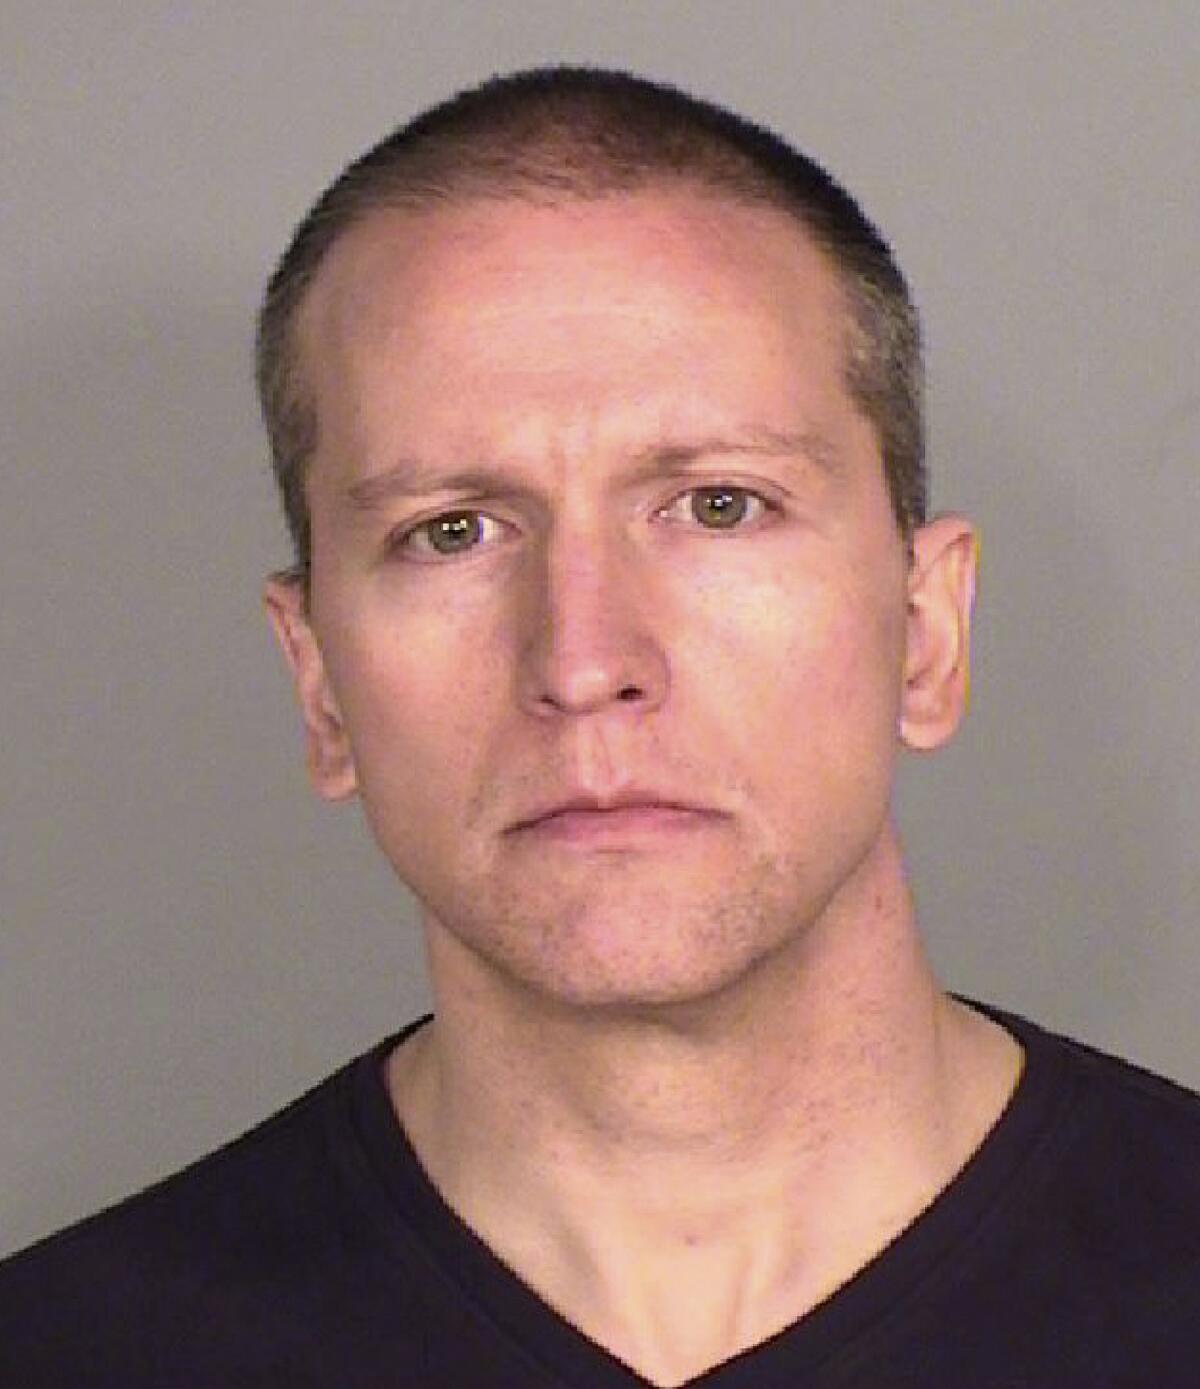 This file photo provided by the Ramsey County, Minn., Sheriff's Office shows former Minneapolis police Officer Derek Chauvin, who was arrested Friday, May 29, 2020, in the Memorial Day death of George Floyd. Chauvin is charged with second-degree murder and manslaughter and jury selection in his trial begins Monday, March 8, 2021. (Ramsey County Sheriff's Office via AP, File)